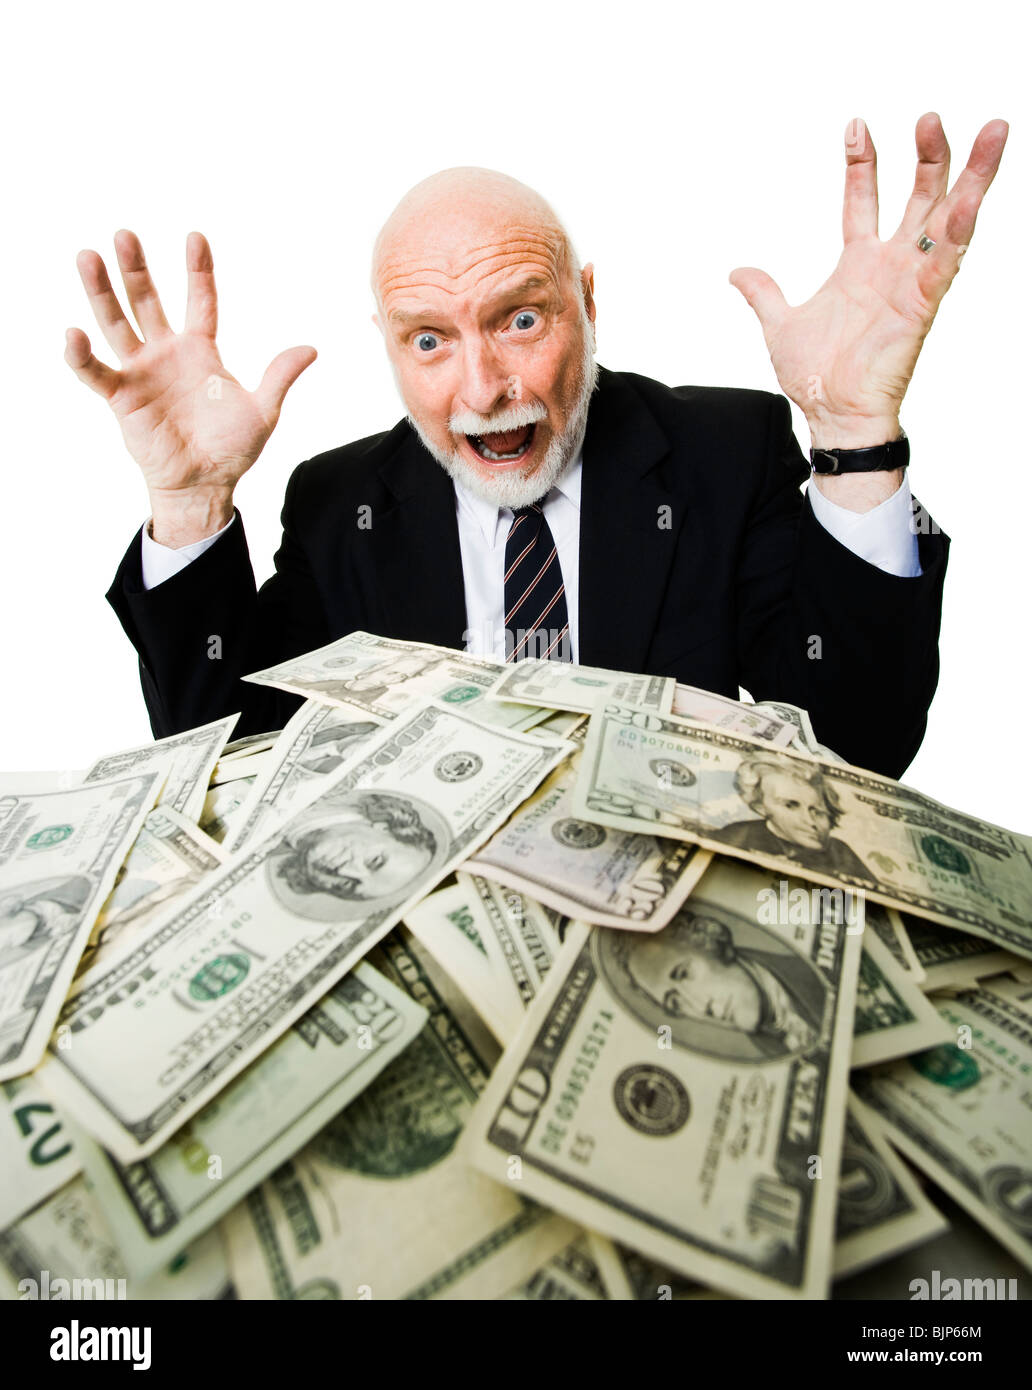 Closeup of businessman looking at pile of money Stock Photo